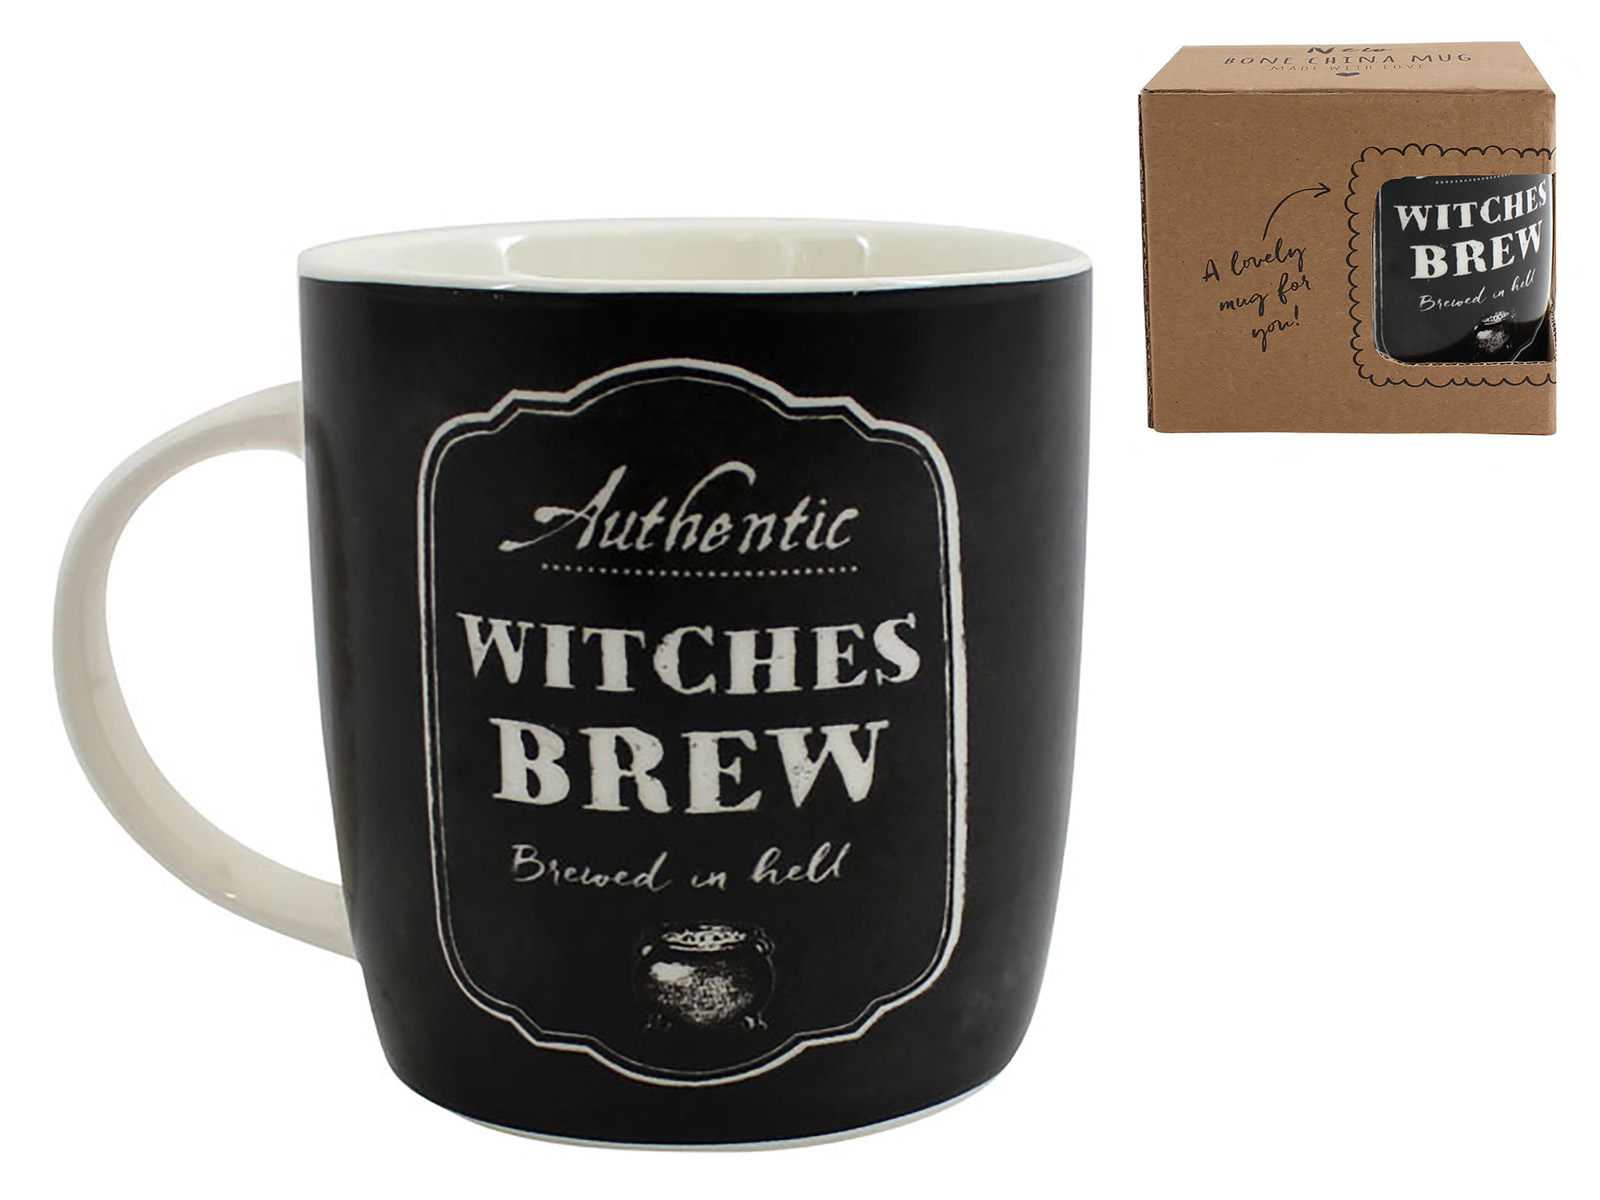 "Witches Brew" Mug in Gift Box